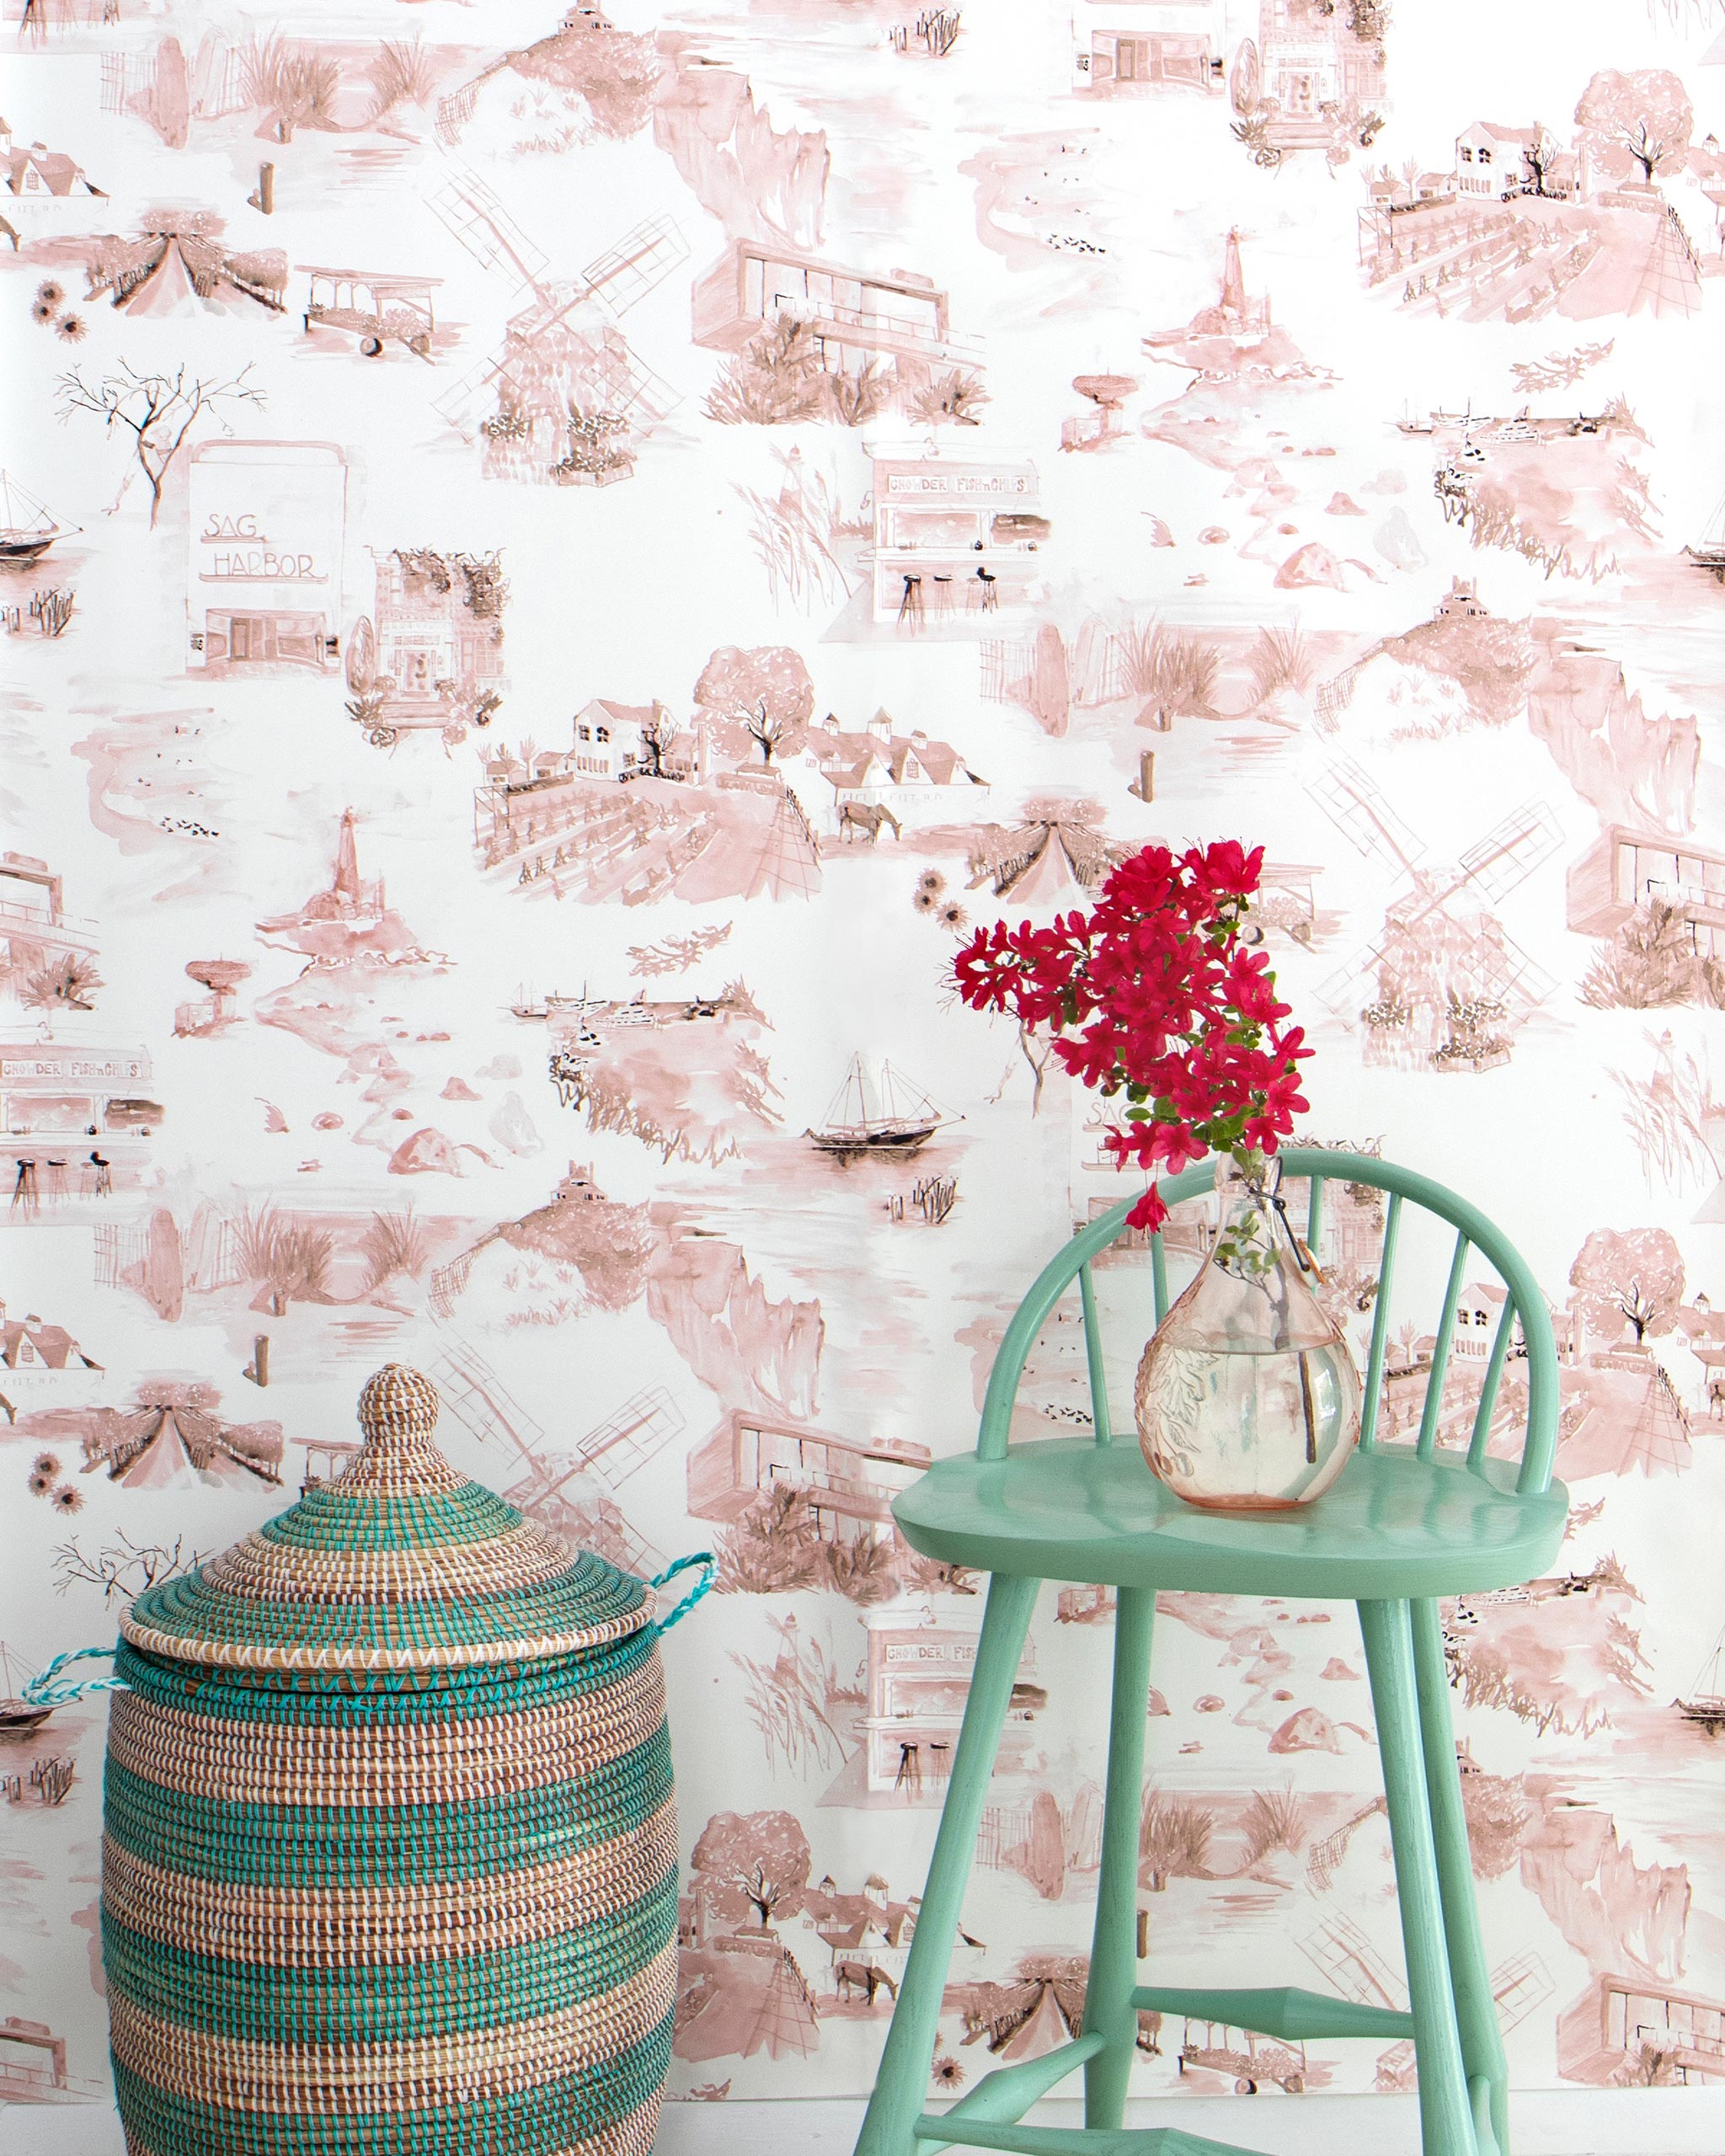 A chair, flowers and a basket stand in front of a wall papered in a playful illustrated city print in pink, brown and white.